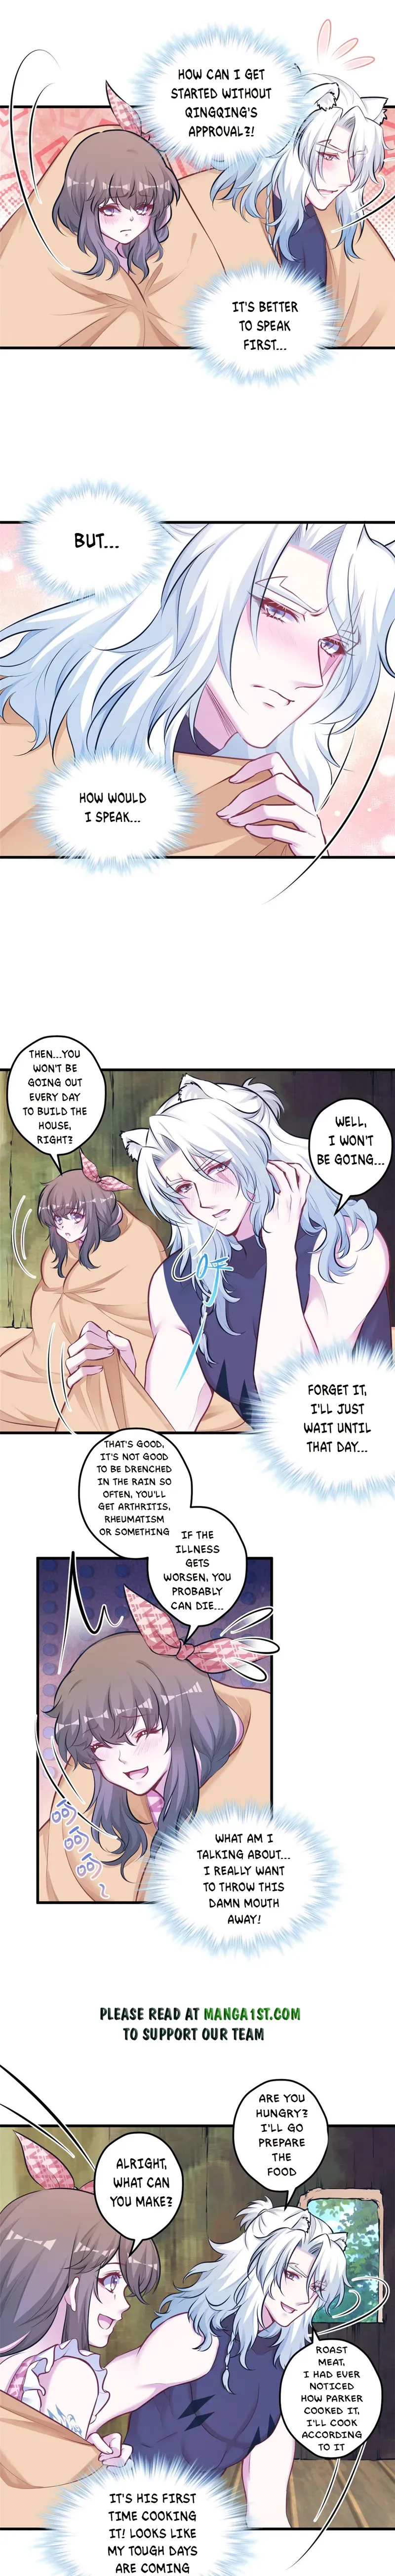 Beauty and the Beasts Chapter 404 page 2